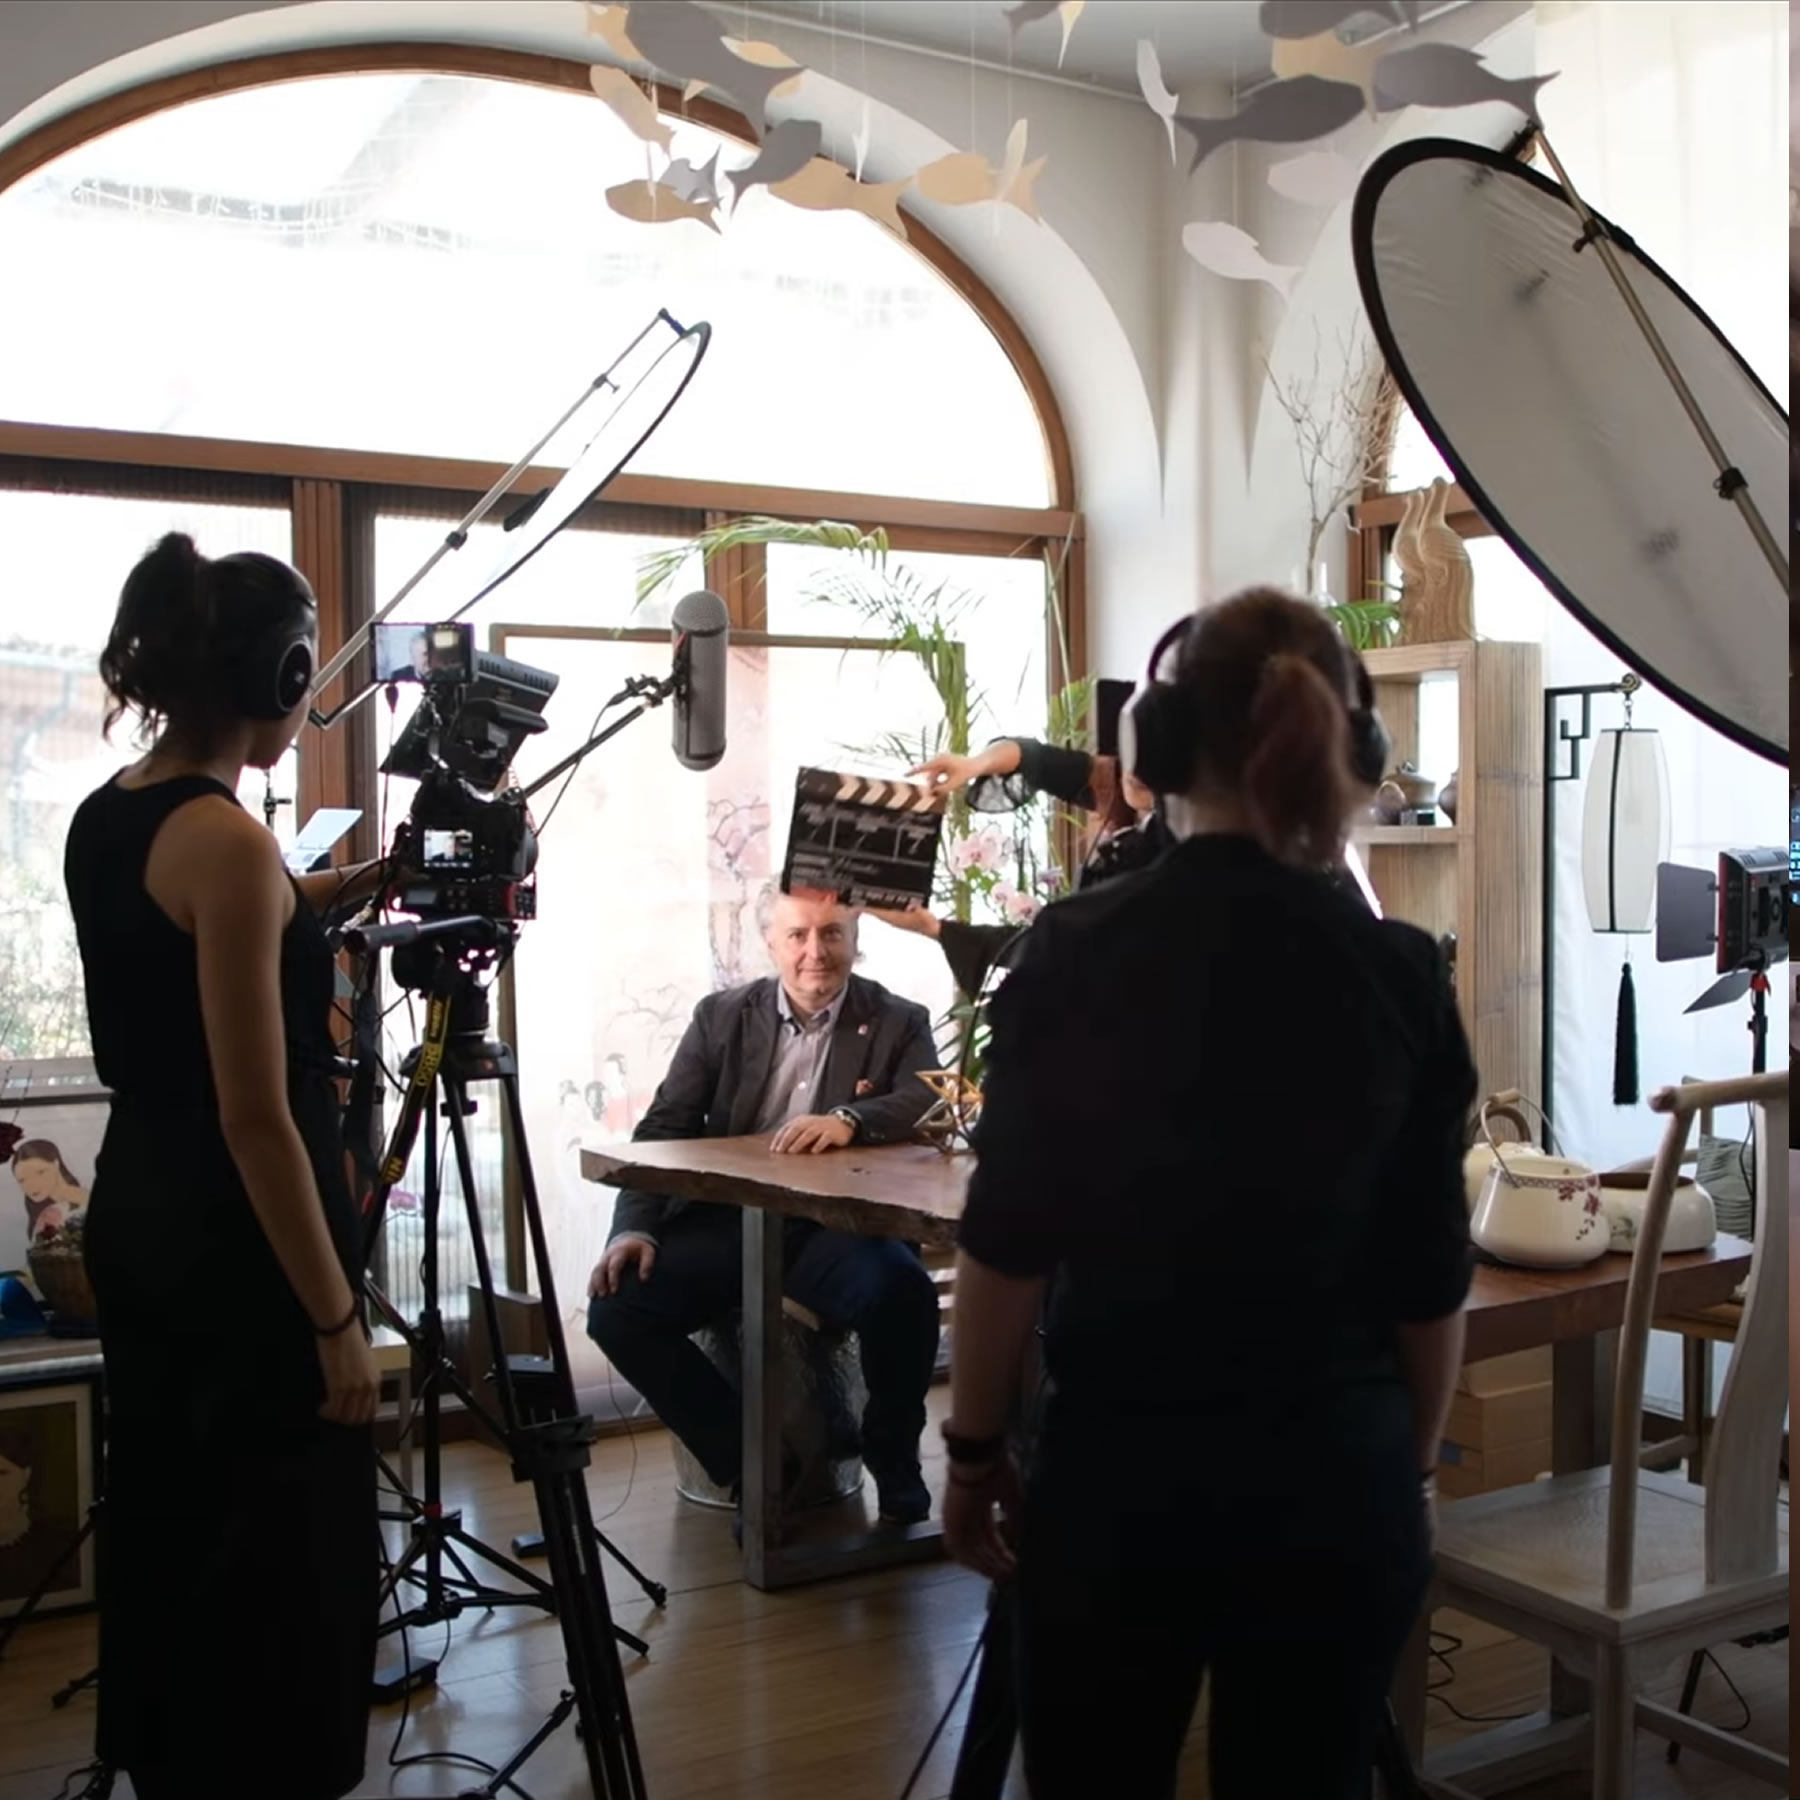 Scene from video interview with designer